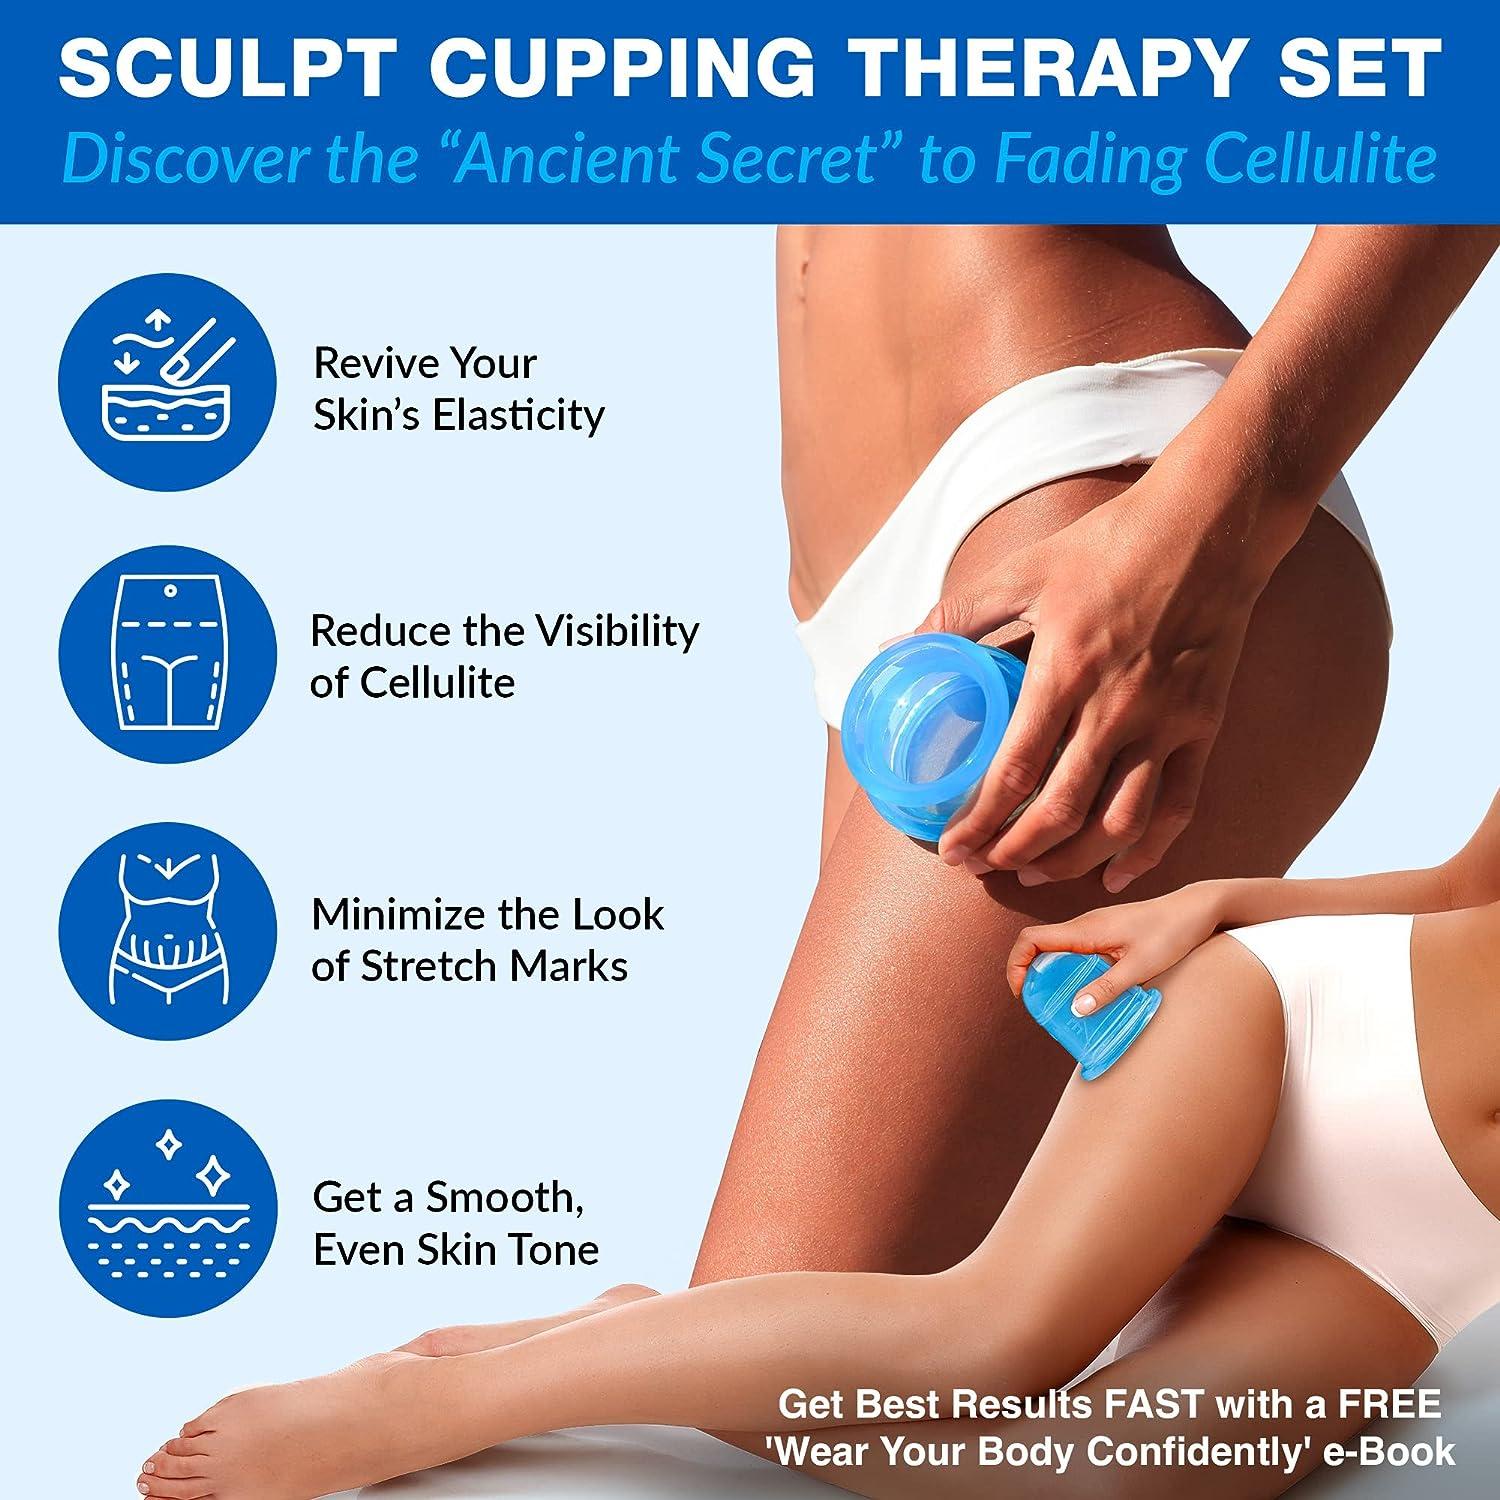 Lure Essentials Review - Cupping Therapy Set